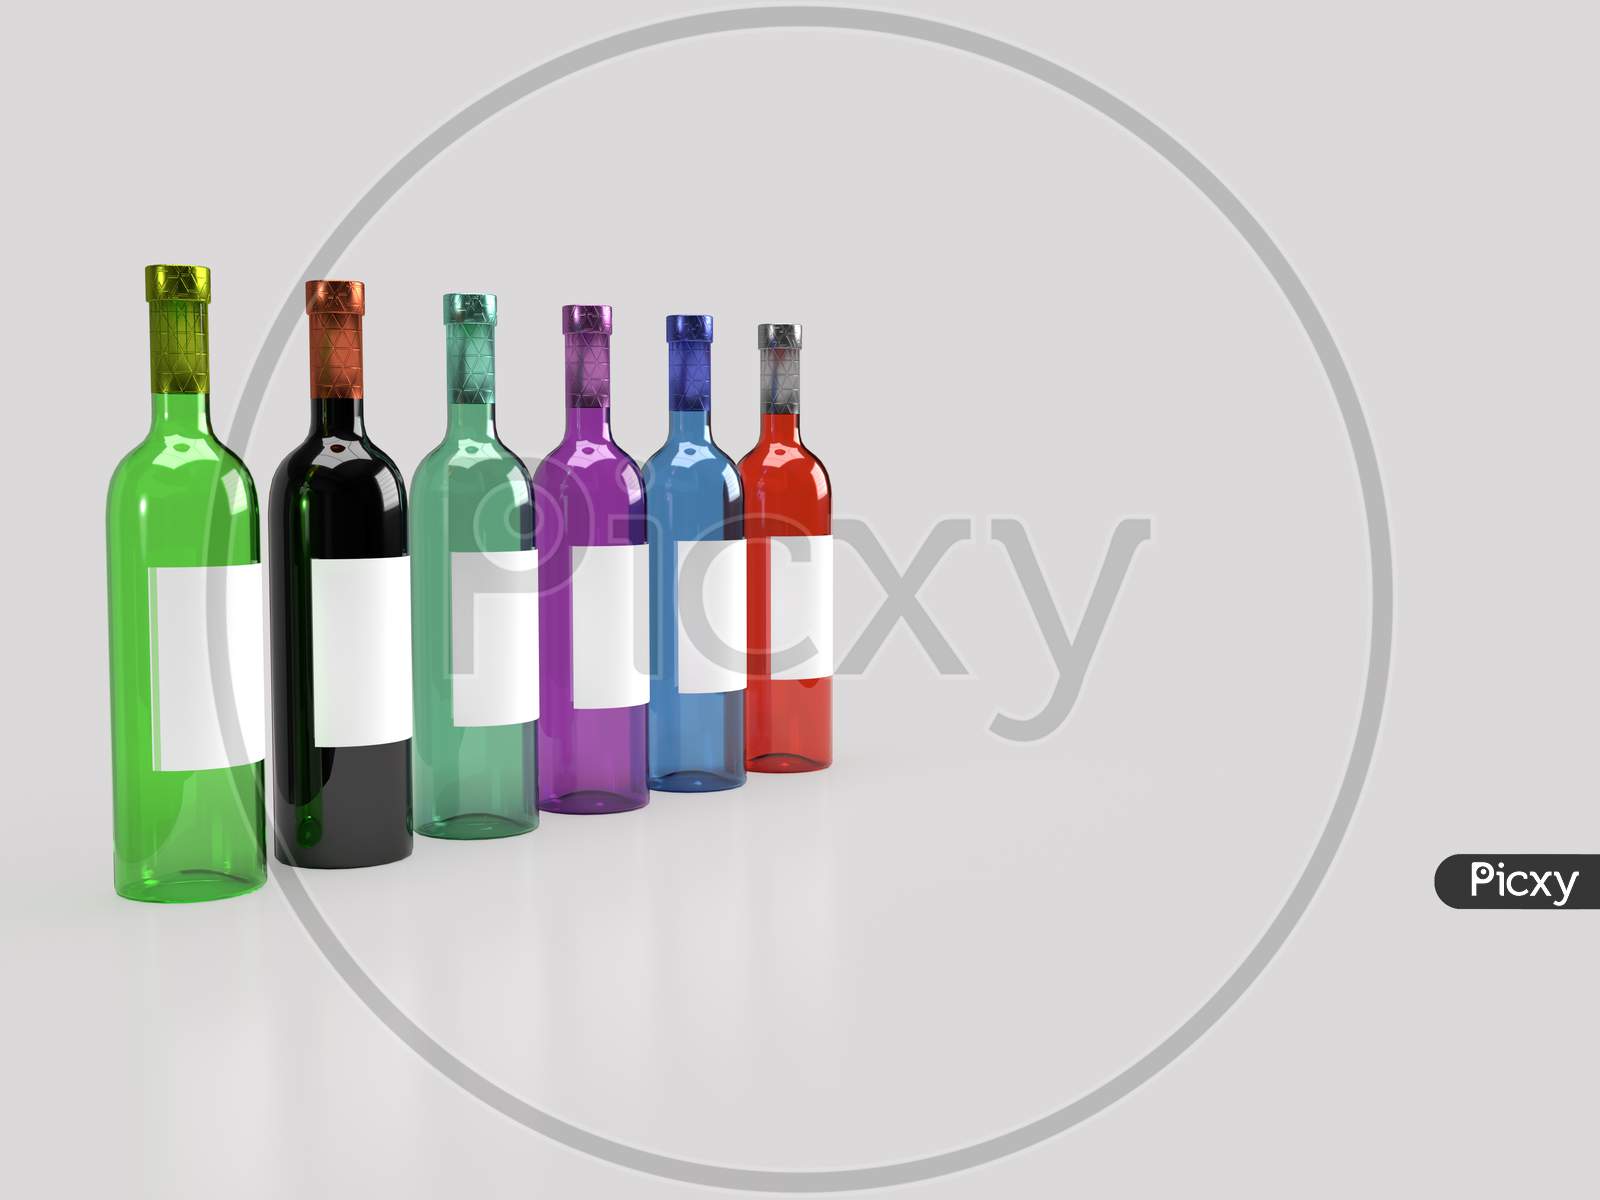 3D Render Of Different Colored Foil Sealed Glass Wine Bottle In Solid Light Grey Background With White Blank Label For Product Mockup.